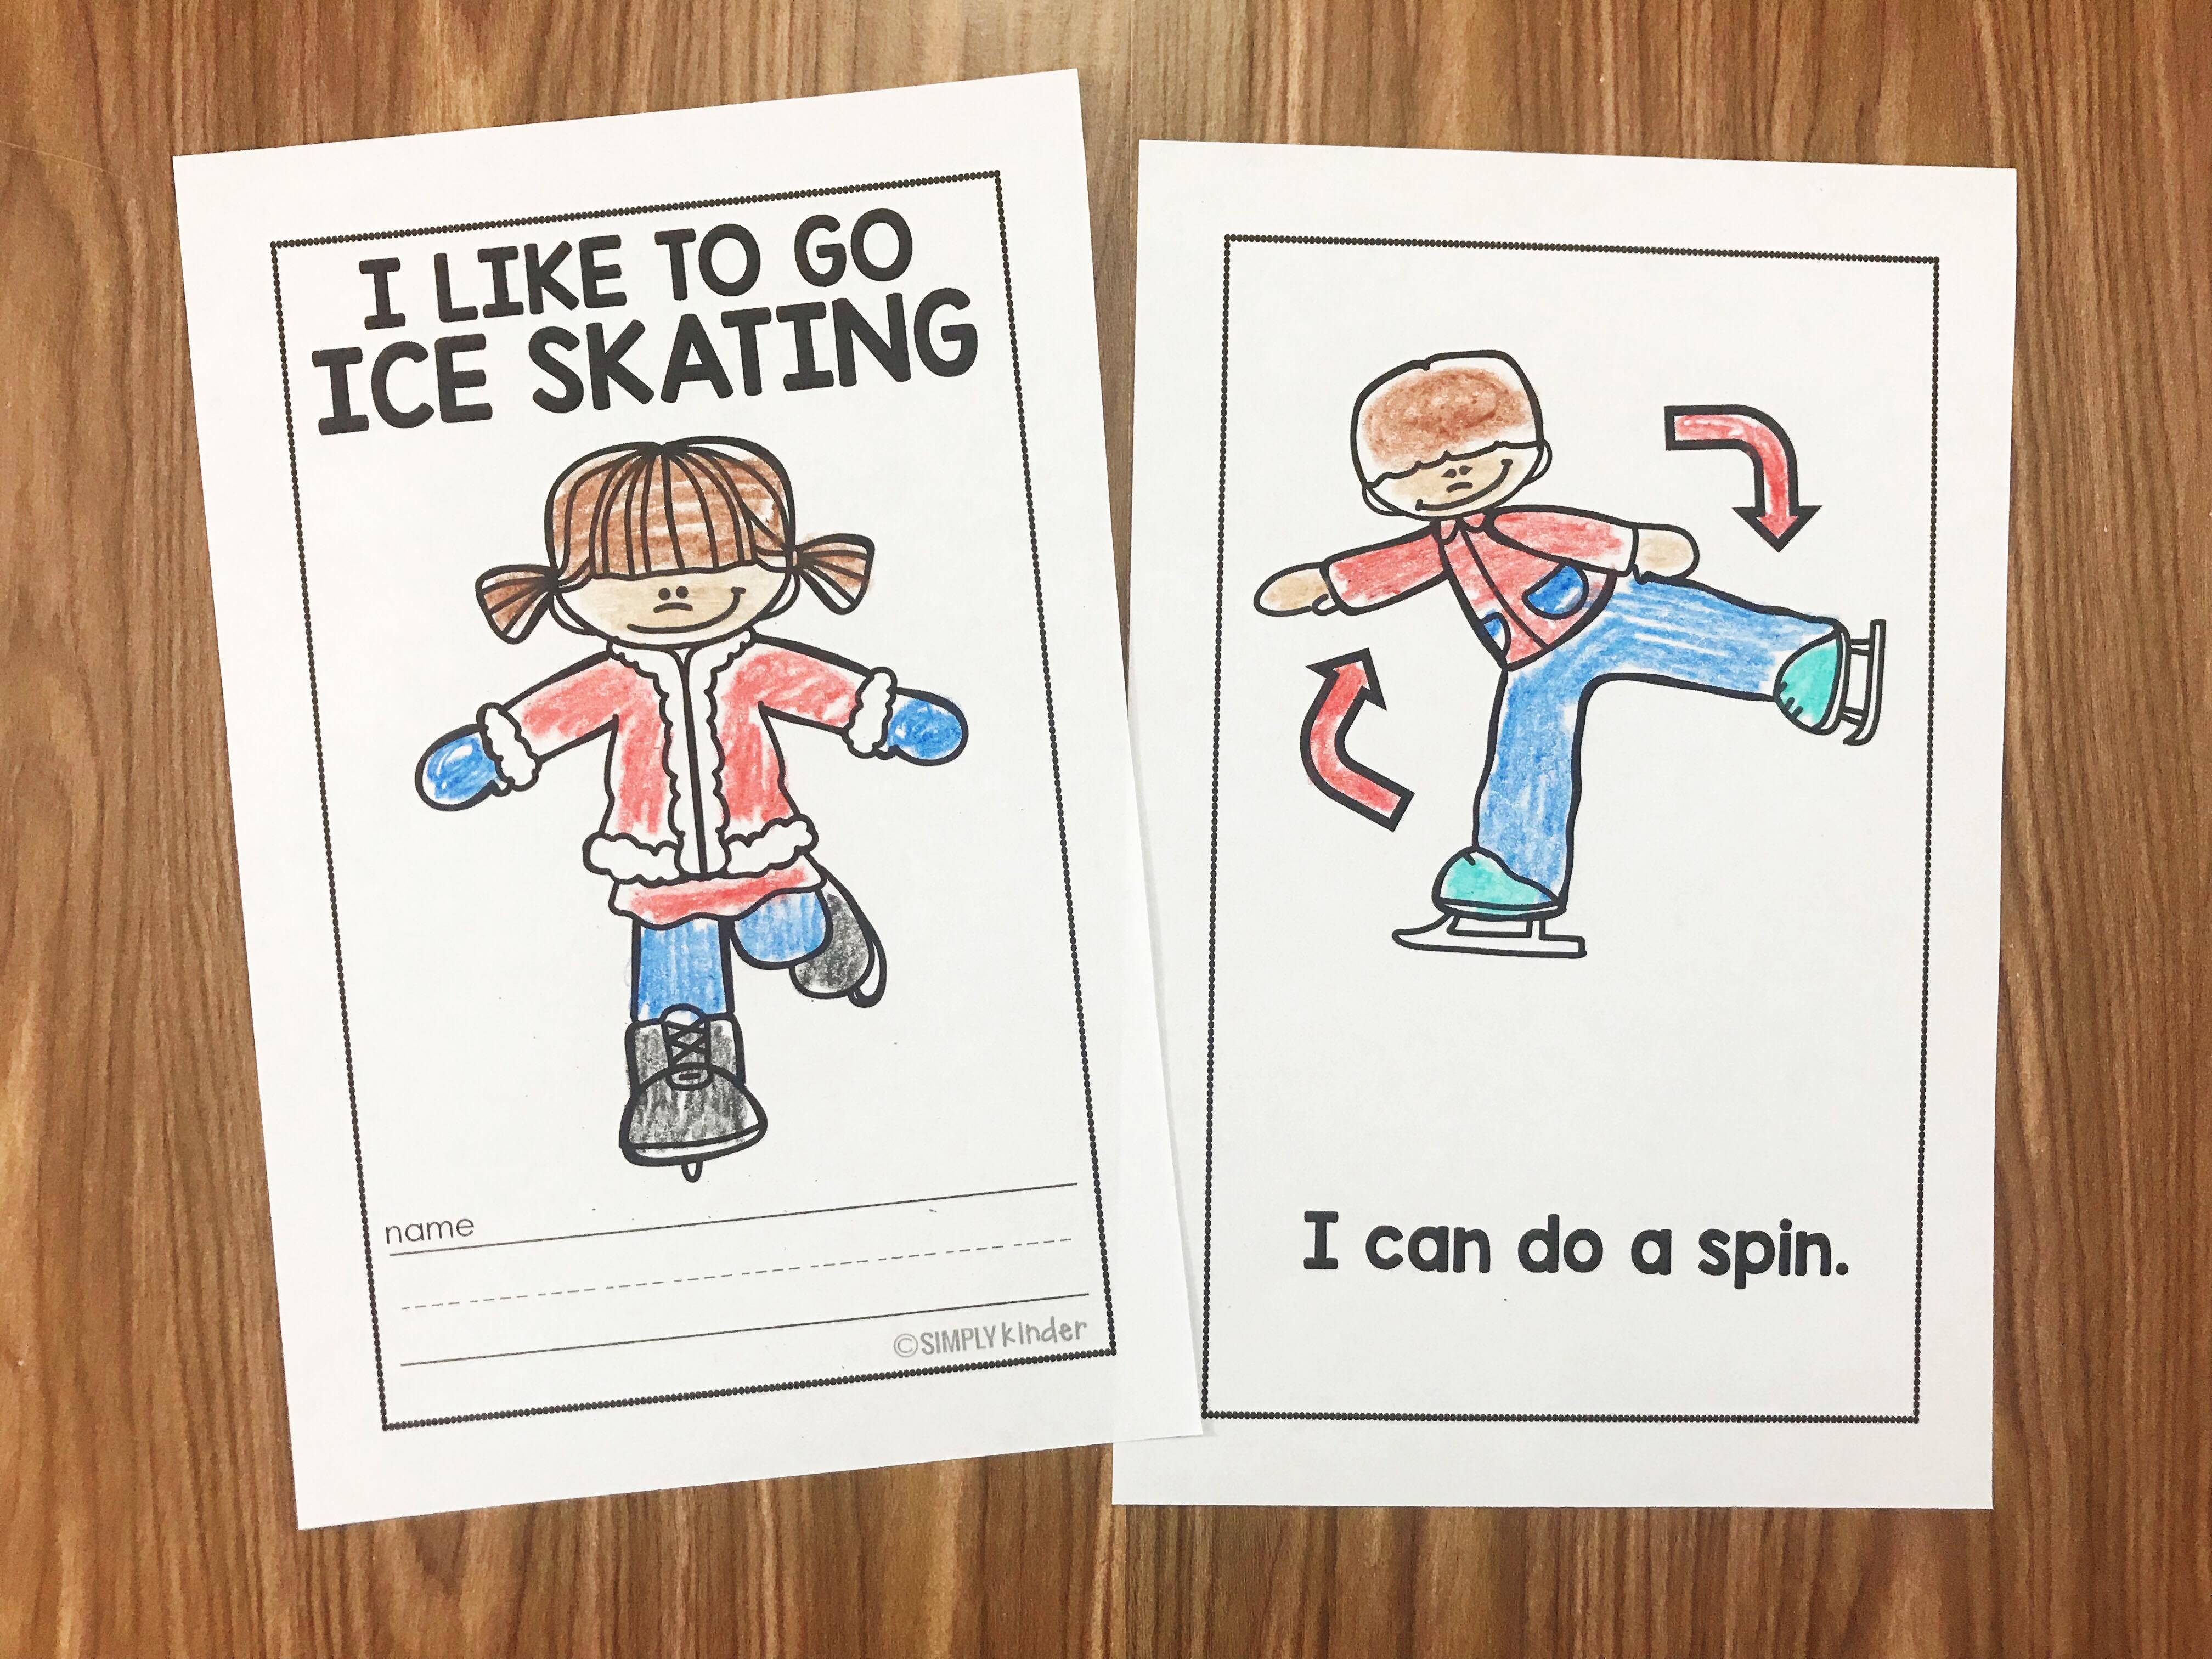 Are you ready to learn more about winter sports?  Our Winter Sports Easy Readers come with several sports that have super simple sentences about the sport.  Perfect for preschool, kindergarten, and first grades from Simply Kinder.